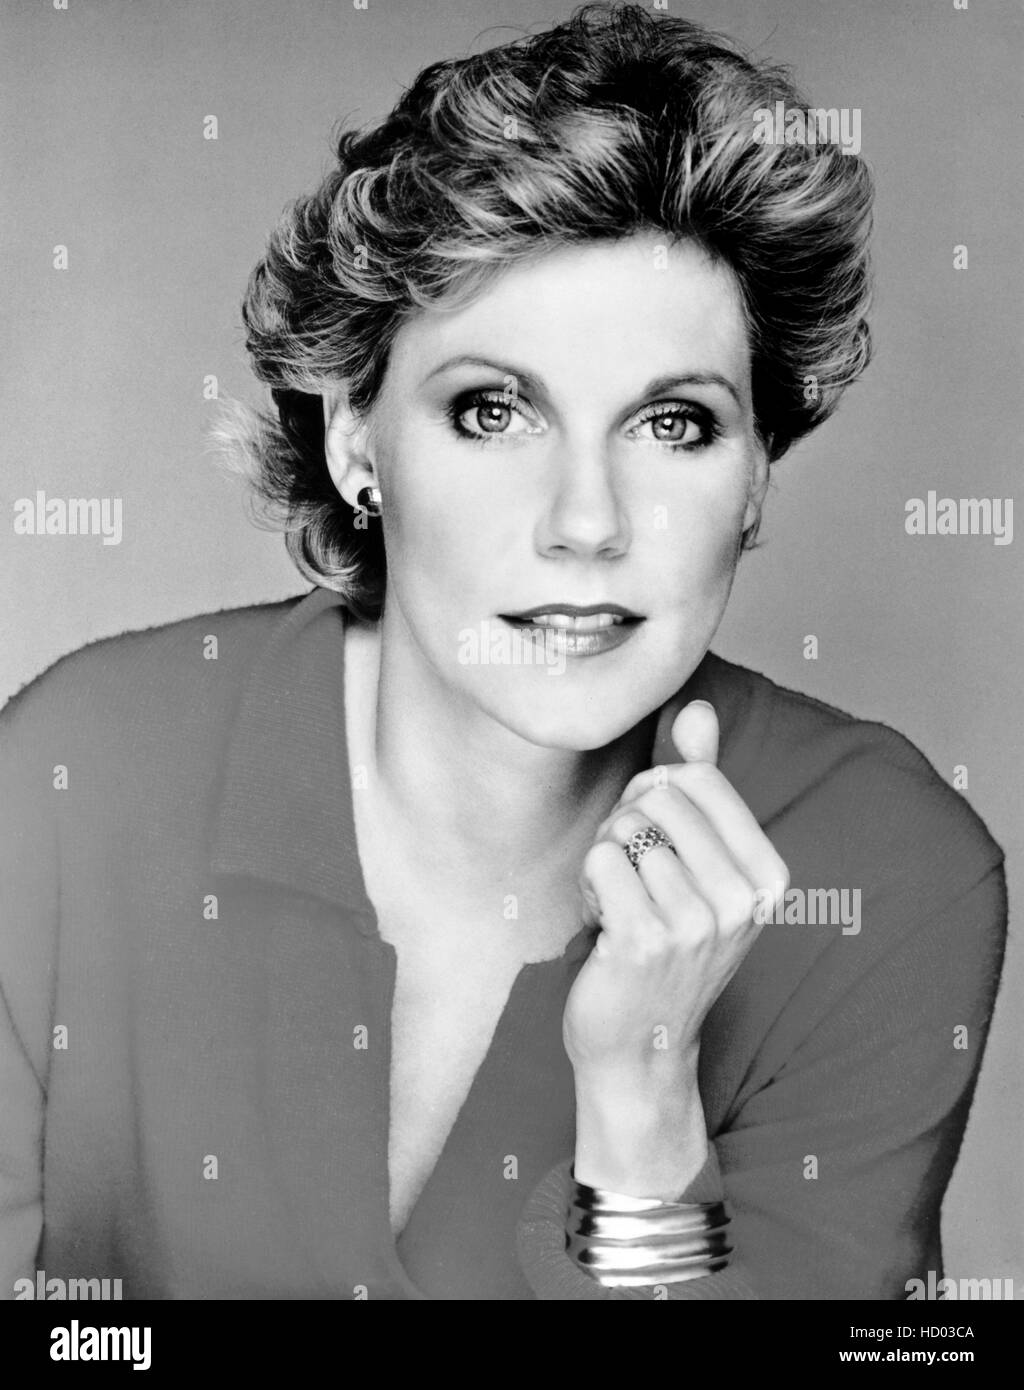 ANNE MURRAY, c. early 1990s Stock Photo